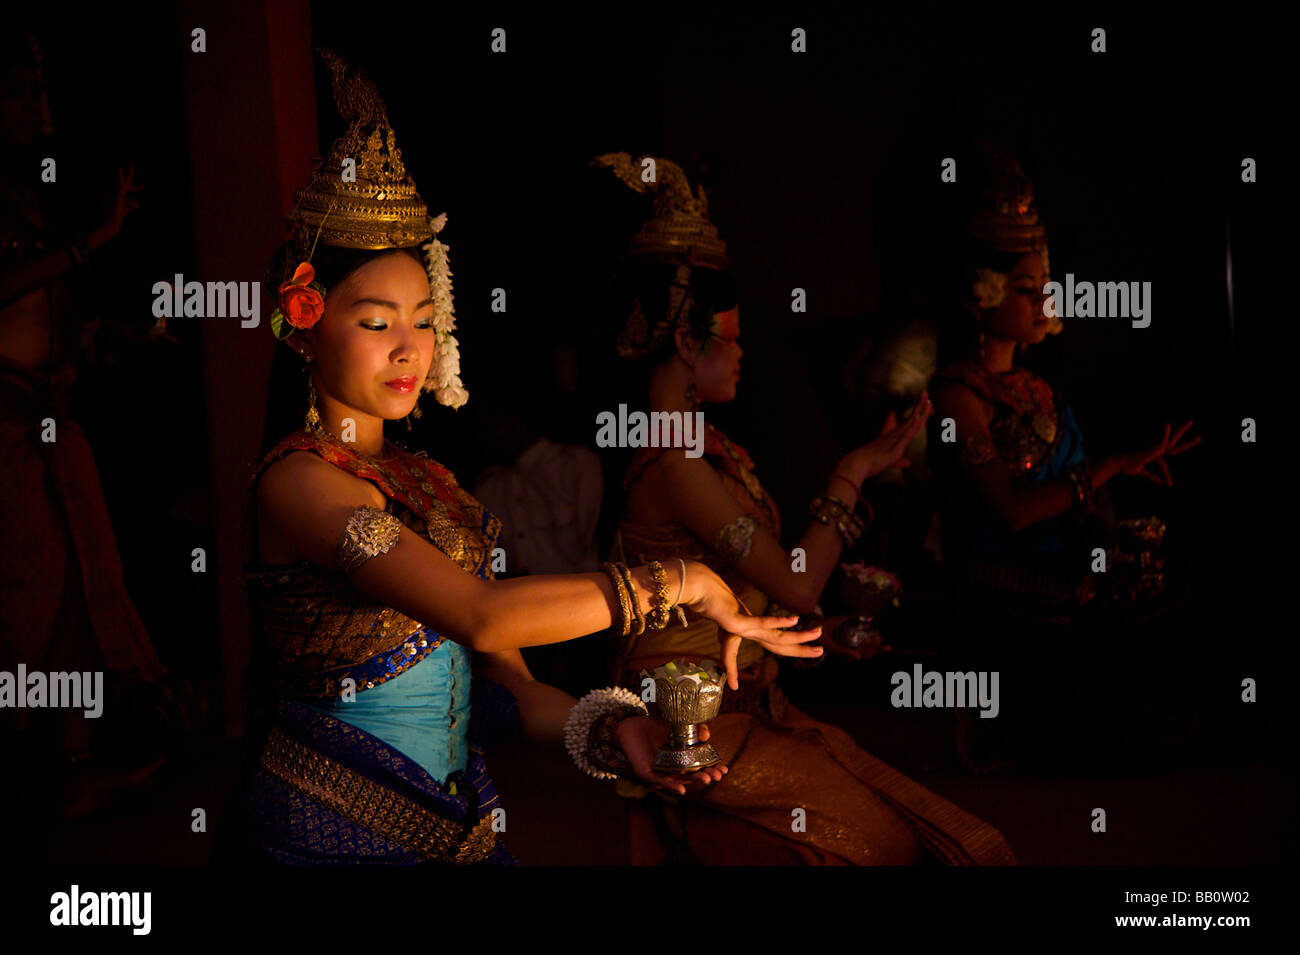 Girl performing traditional dance with cup in Siem Reap, Cambodia near Angkor Wat Stock Photo